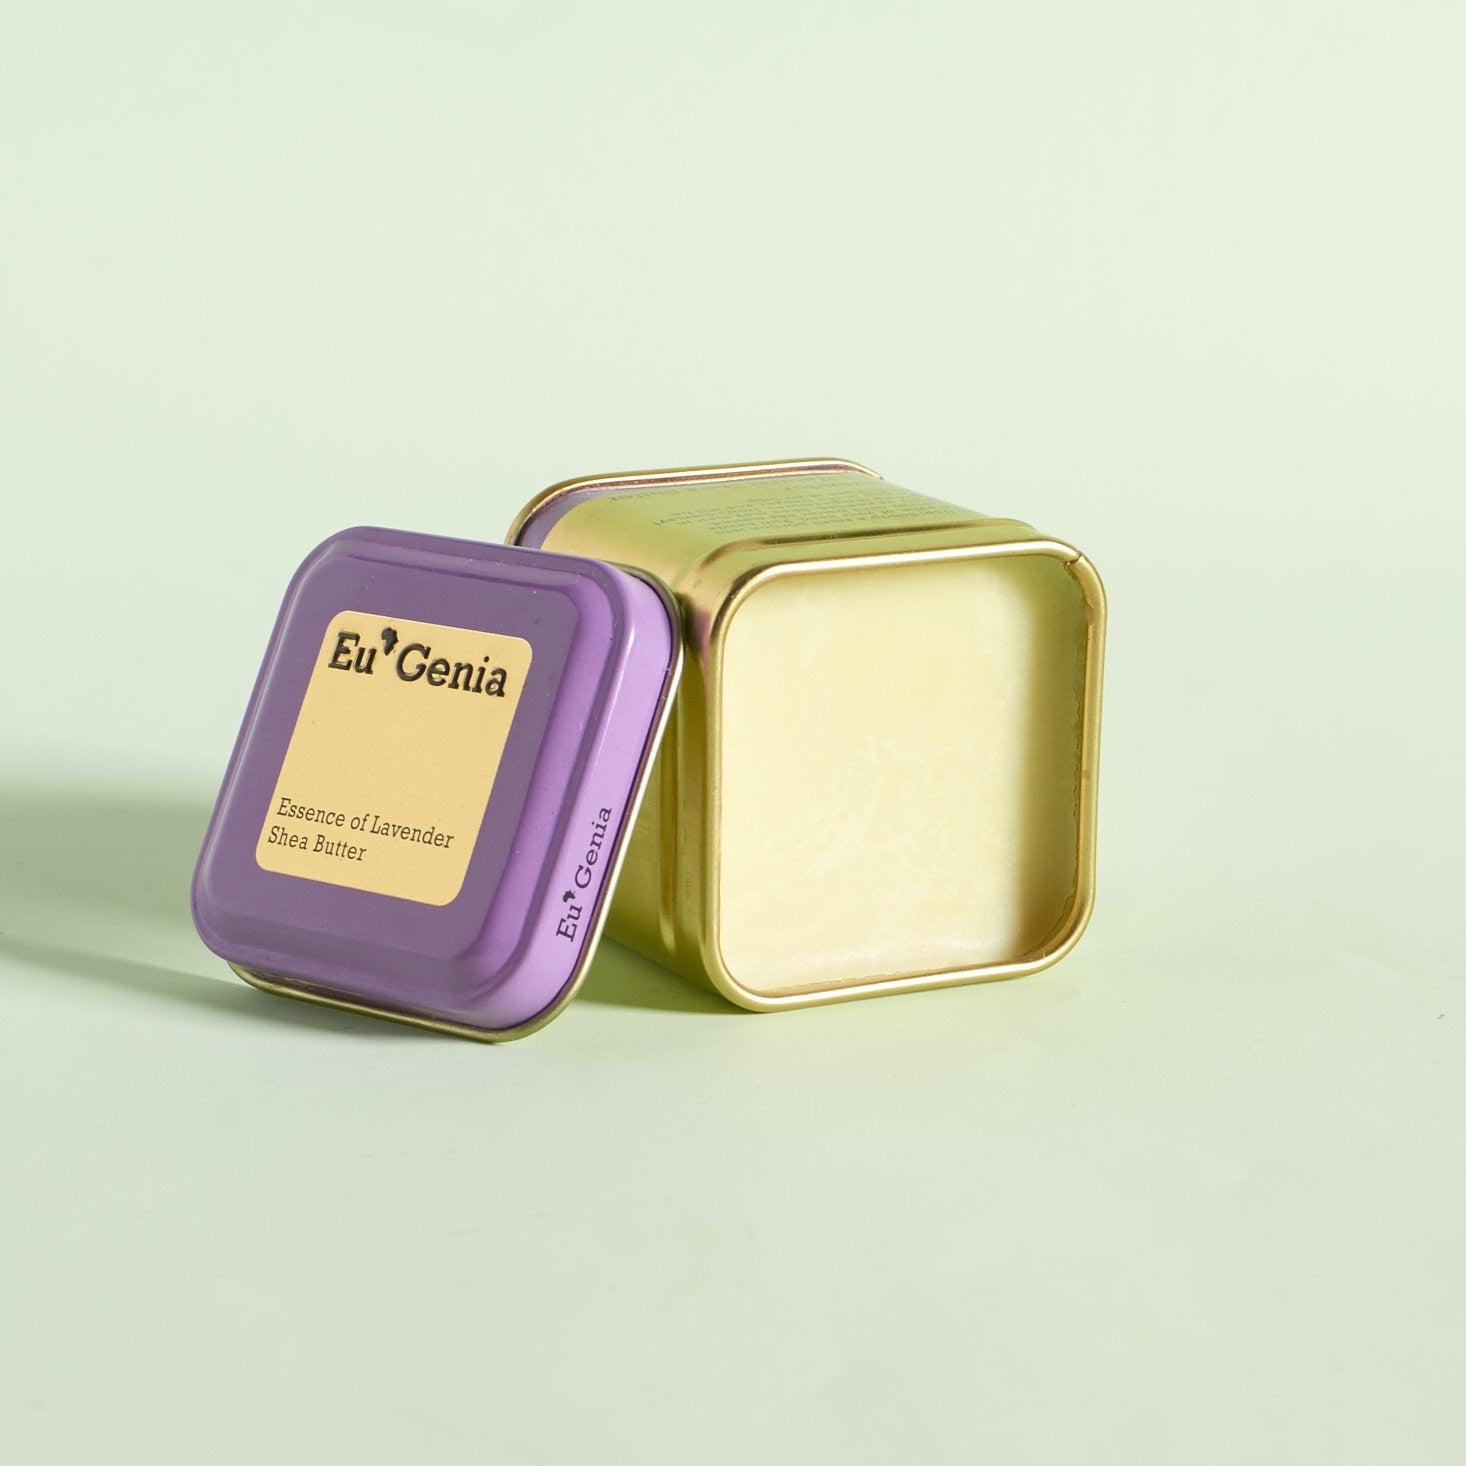 Gold tin filled with 100% natural shea butter and lid leaning against the tin that reads “Essence of Lavender”.